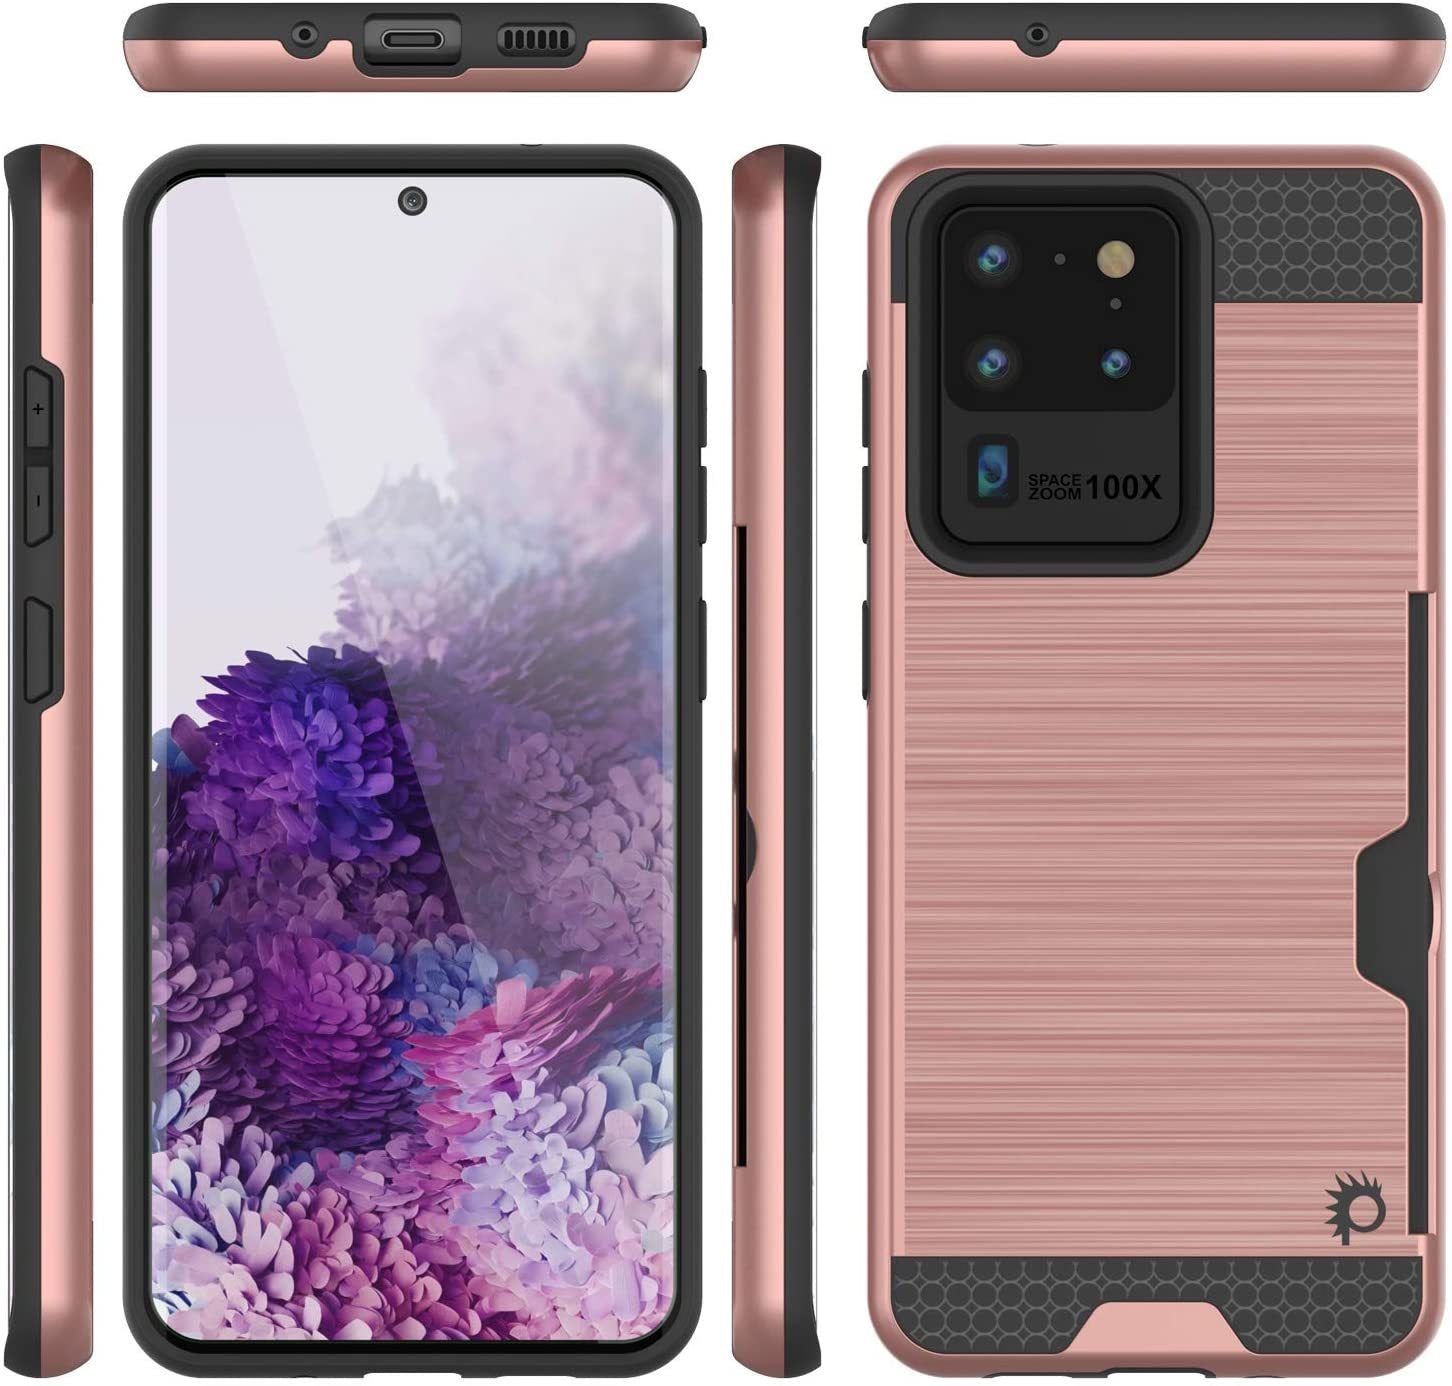 Galaxy S20 Ultra Case, PUNKcase [SLOT Series] [Slim Fit] Dual-Layer Armor Cover w/Integrated Anti-Shock System, Credit Card Slot [Rose Gold]